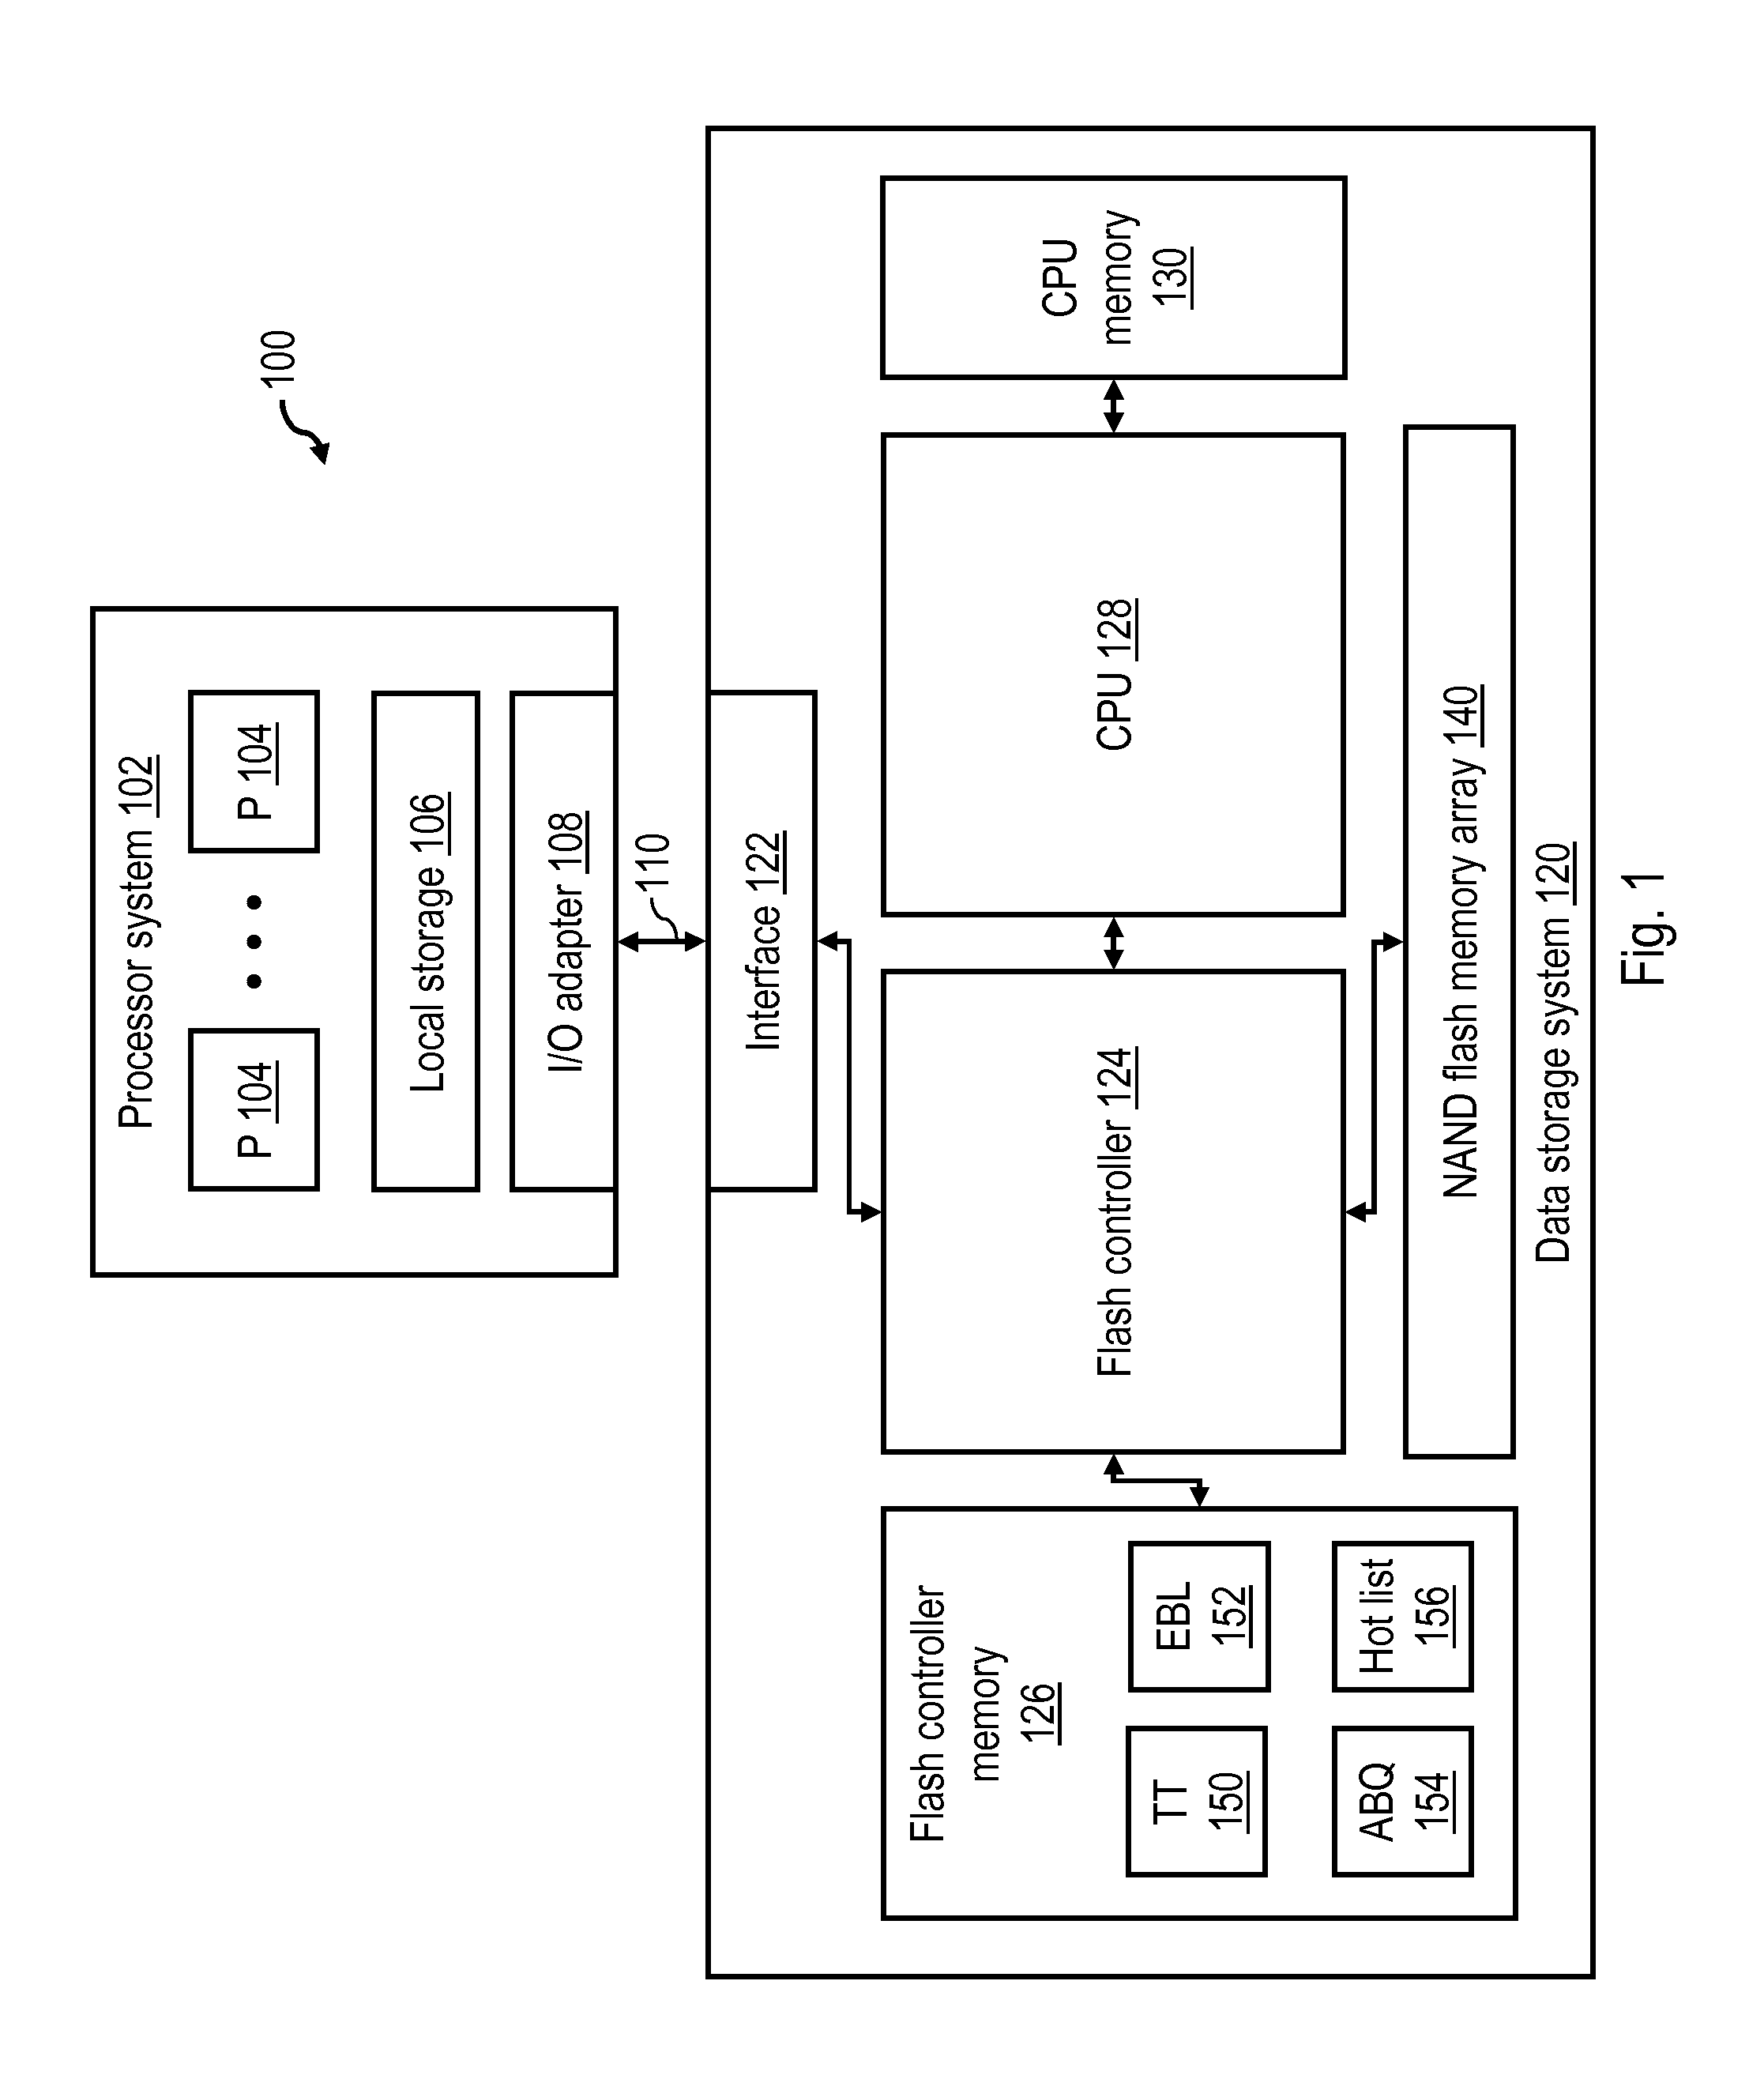 Programming non-volatile memory using a relaxed dwell time